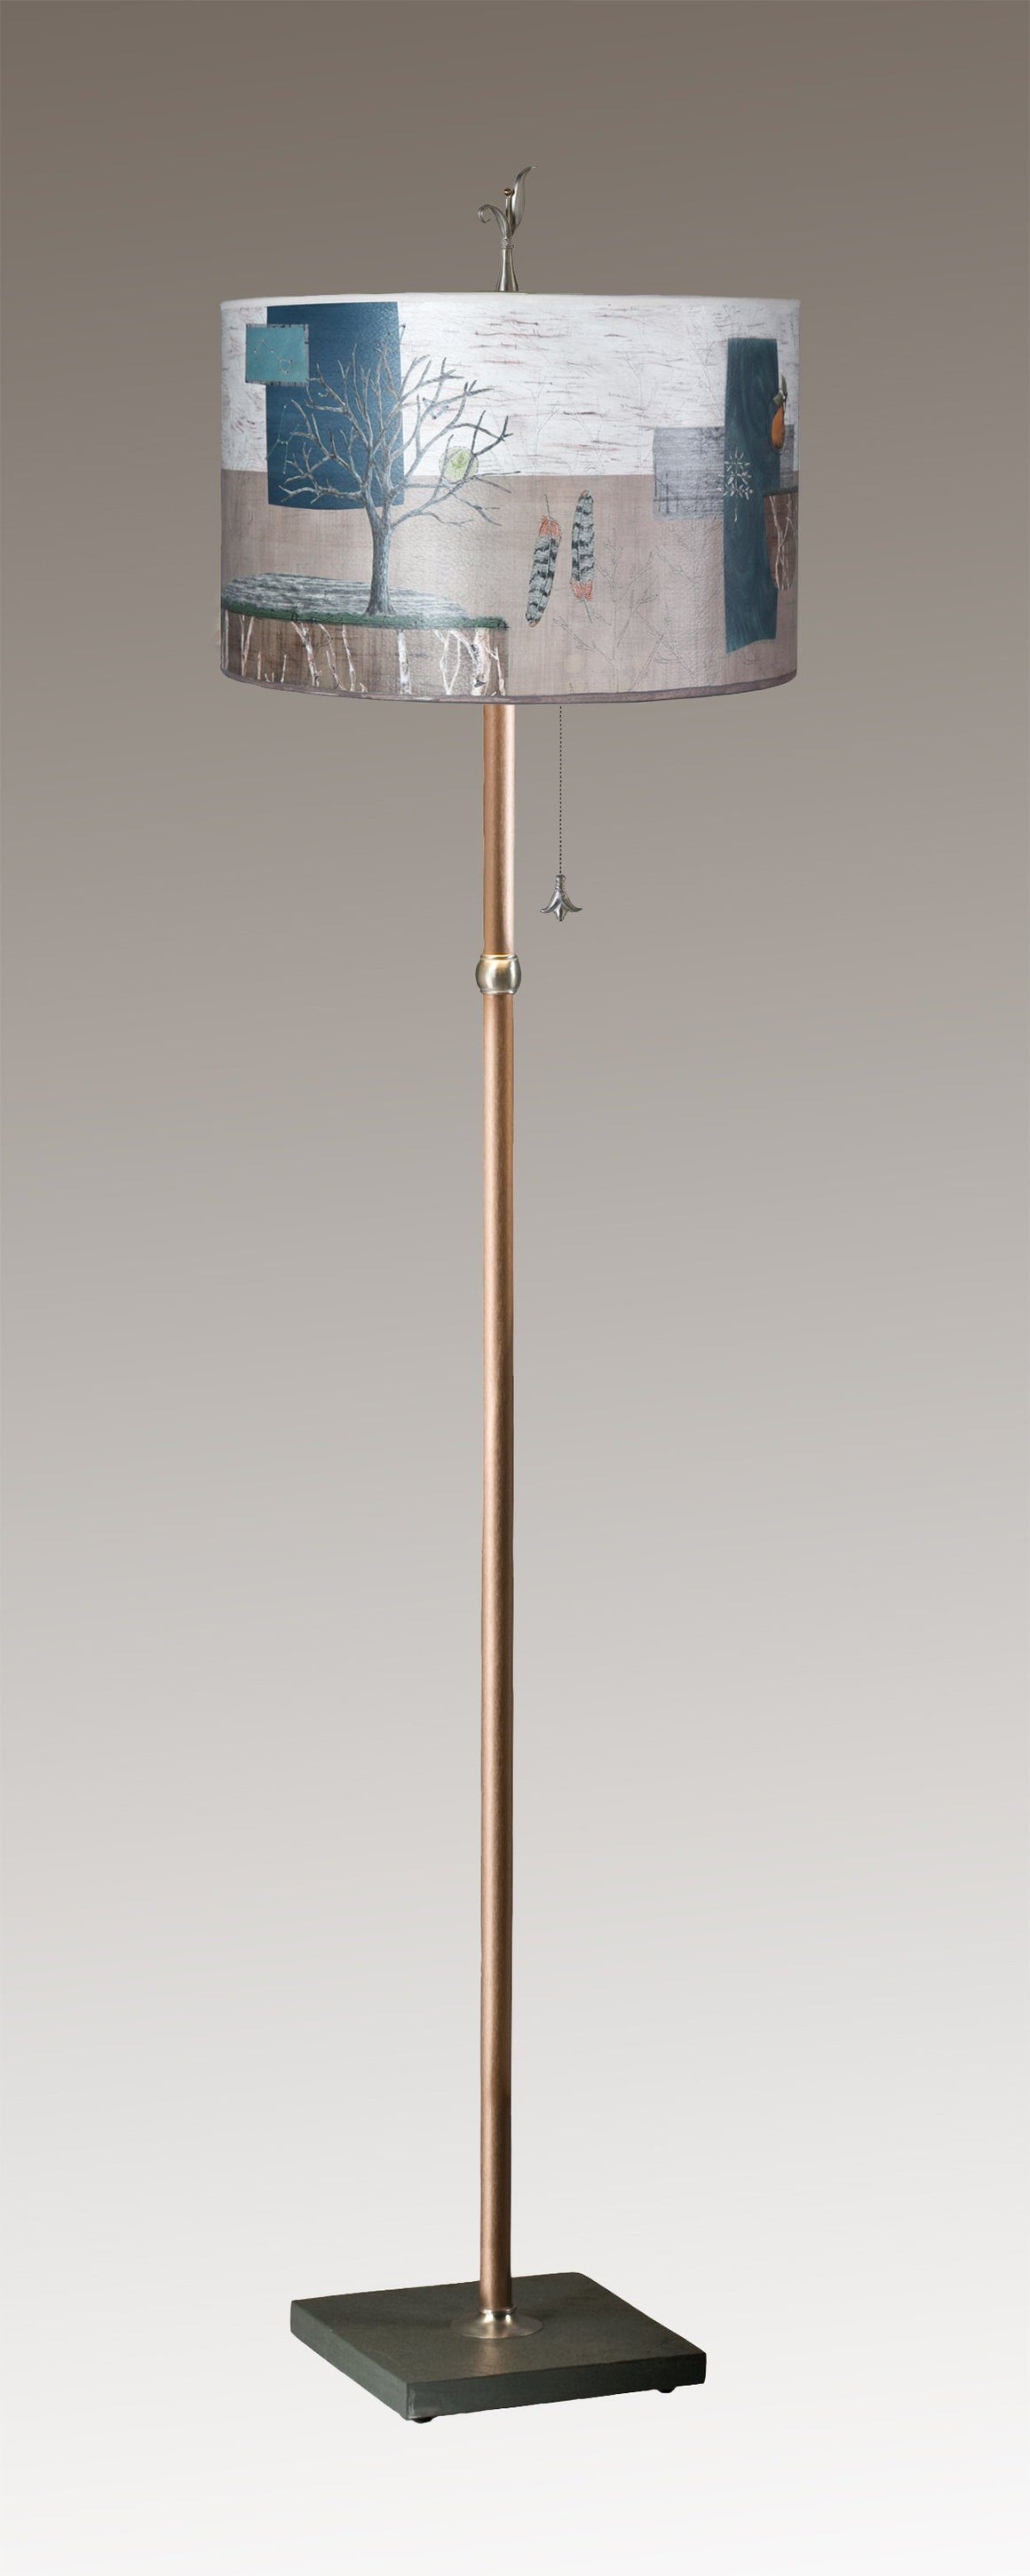 Copper Floor Lamp with Large Drum Shade in Wander in Drift